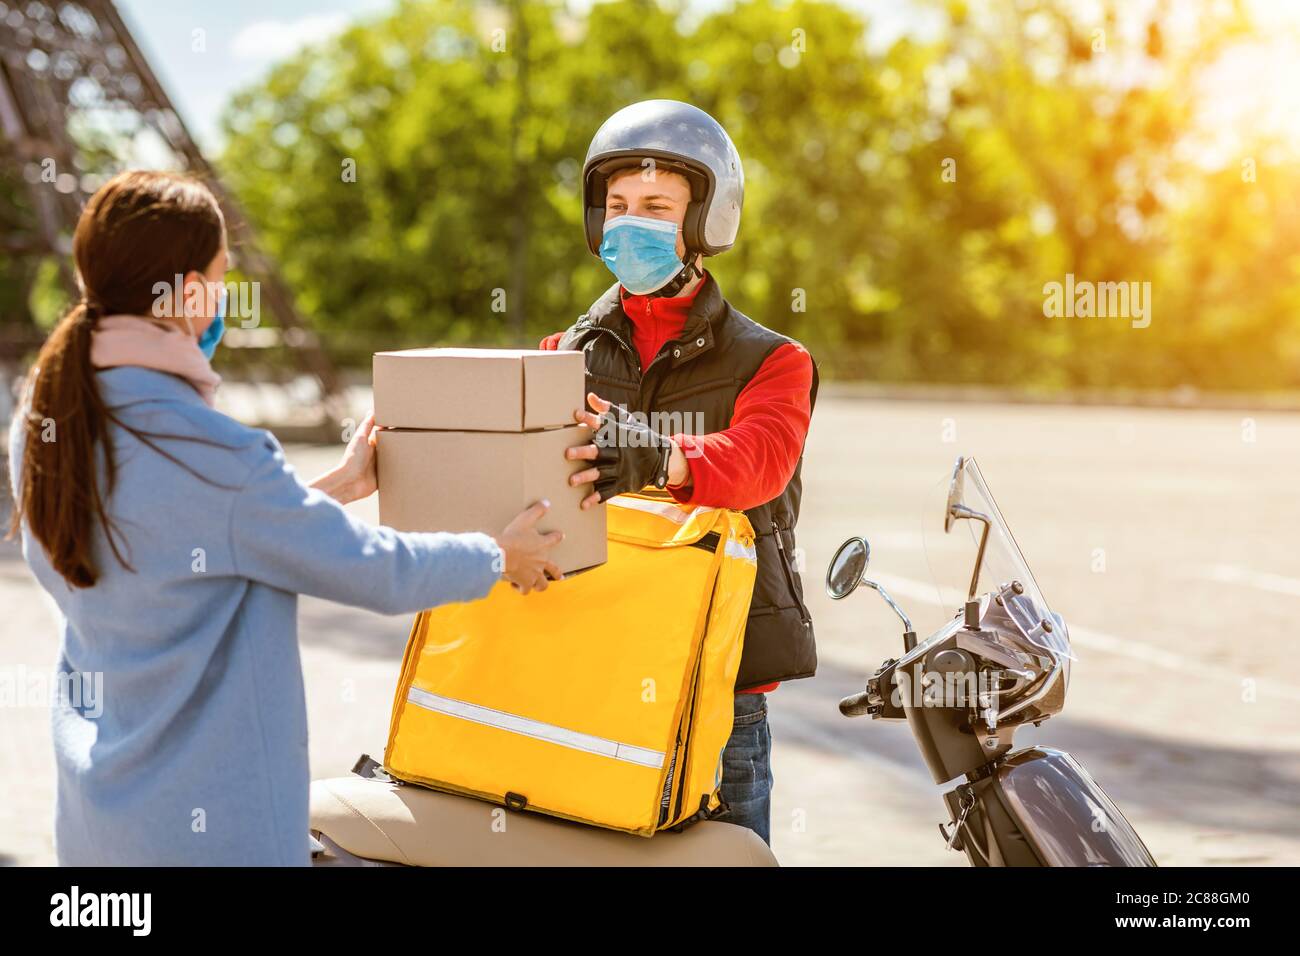 Delivery Guy Giving Food Boxes To Customer Girl Standing Outdoors Stock Photo